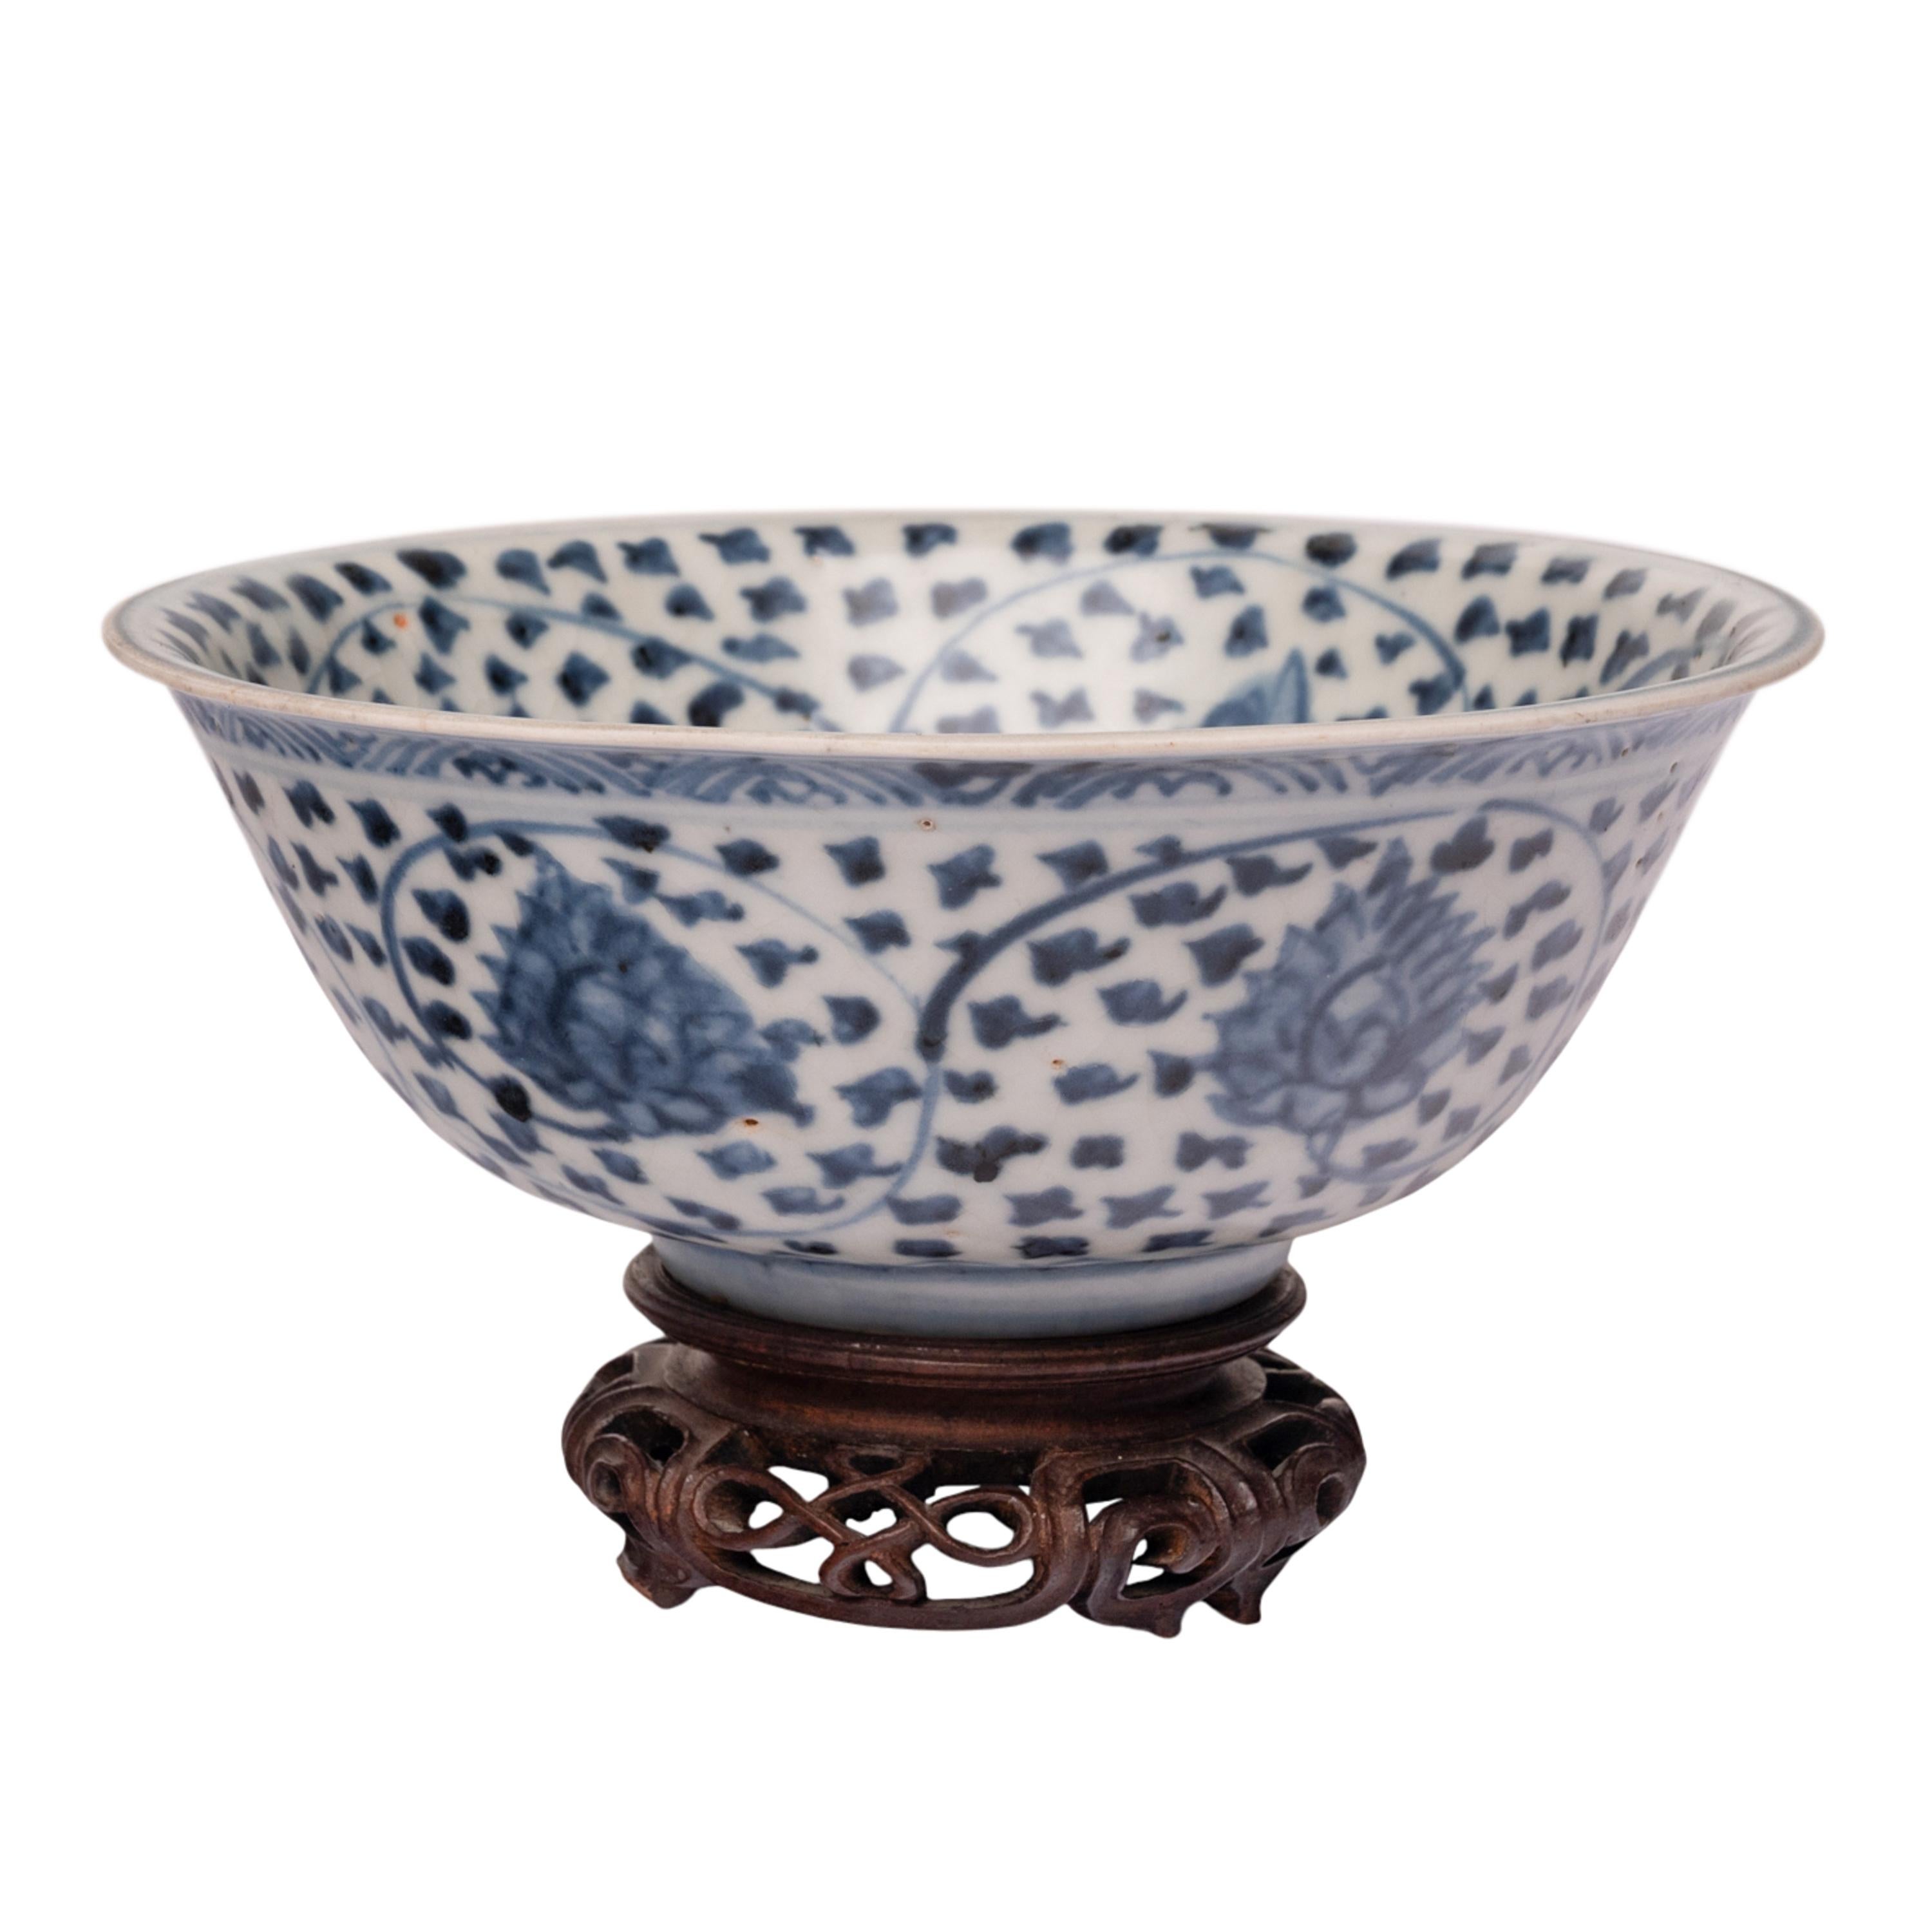 A very good antique Chinese blue and white bowl for the Islamic market, late Ming dynasty, 16th century.
The bowl having a flared rim with a band of gadrooned decoration, the exterior of the bowl is decorated with an overall design of stylised